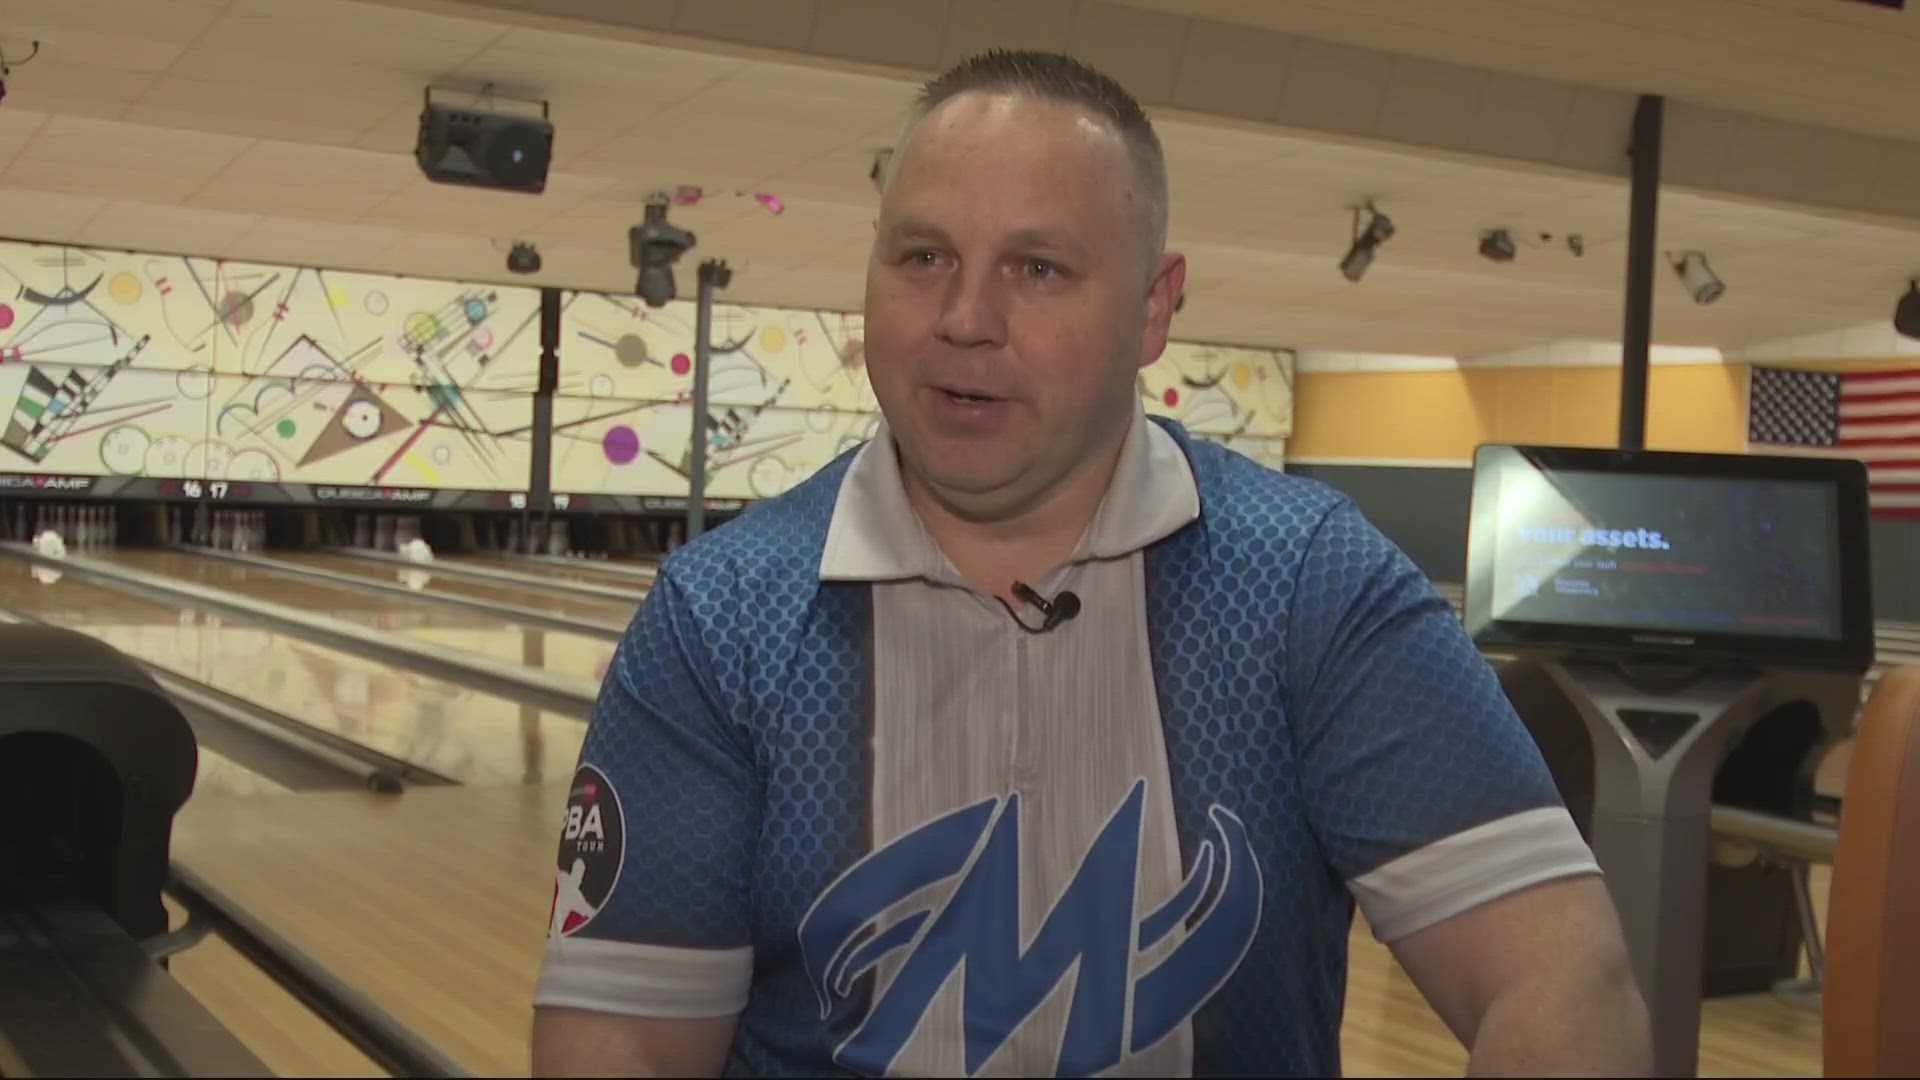 Gerald Strohl is stationed at Mayport, but has dreams of one day competing full-time on the PBA tour.